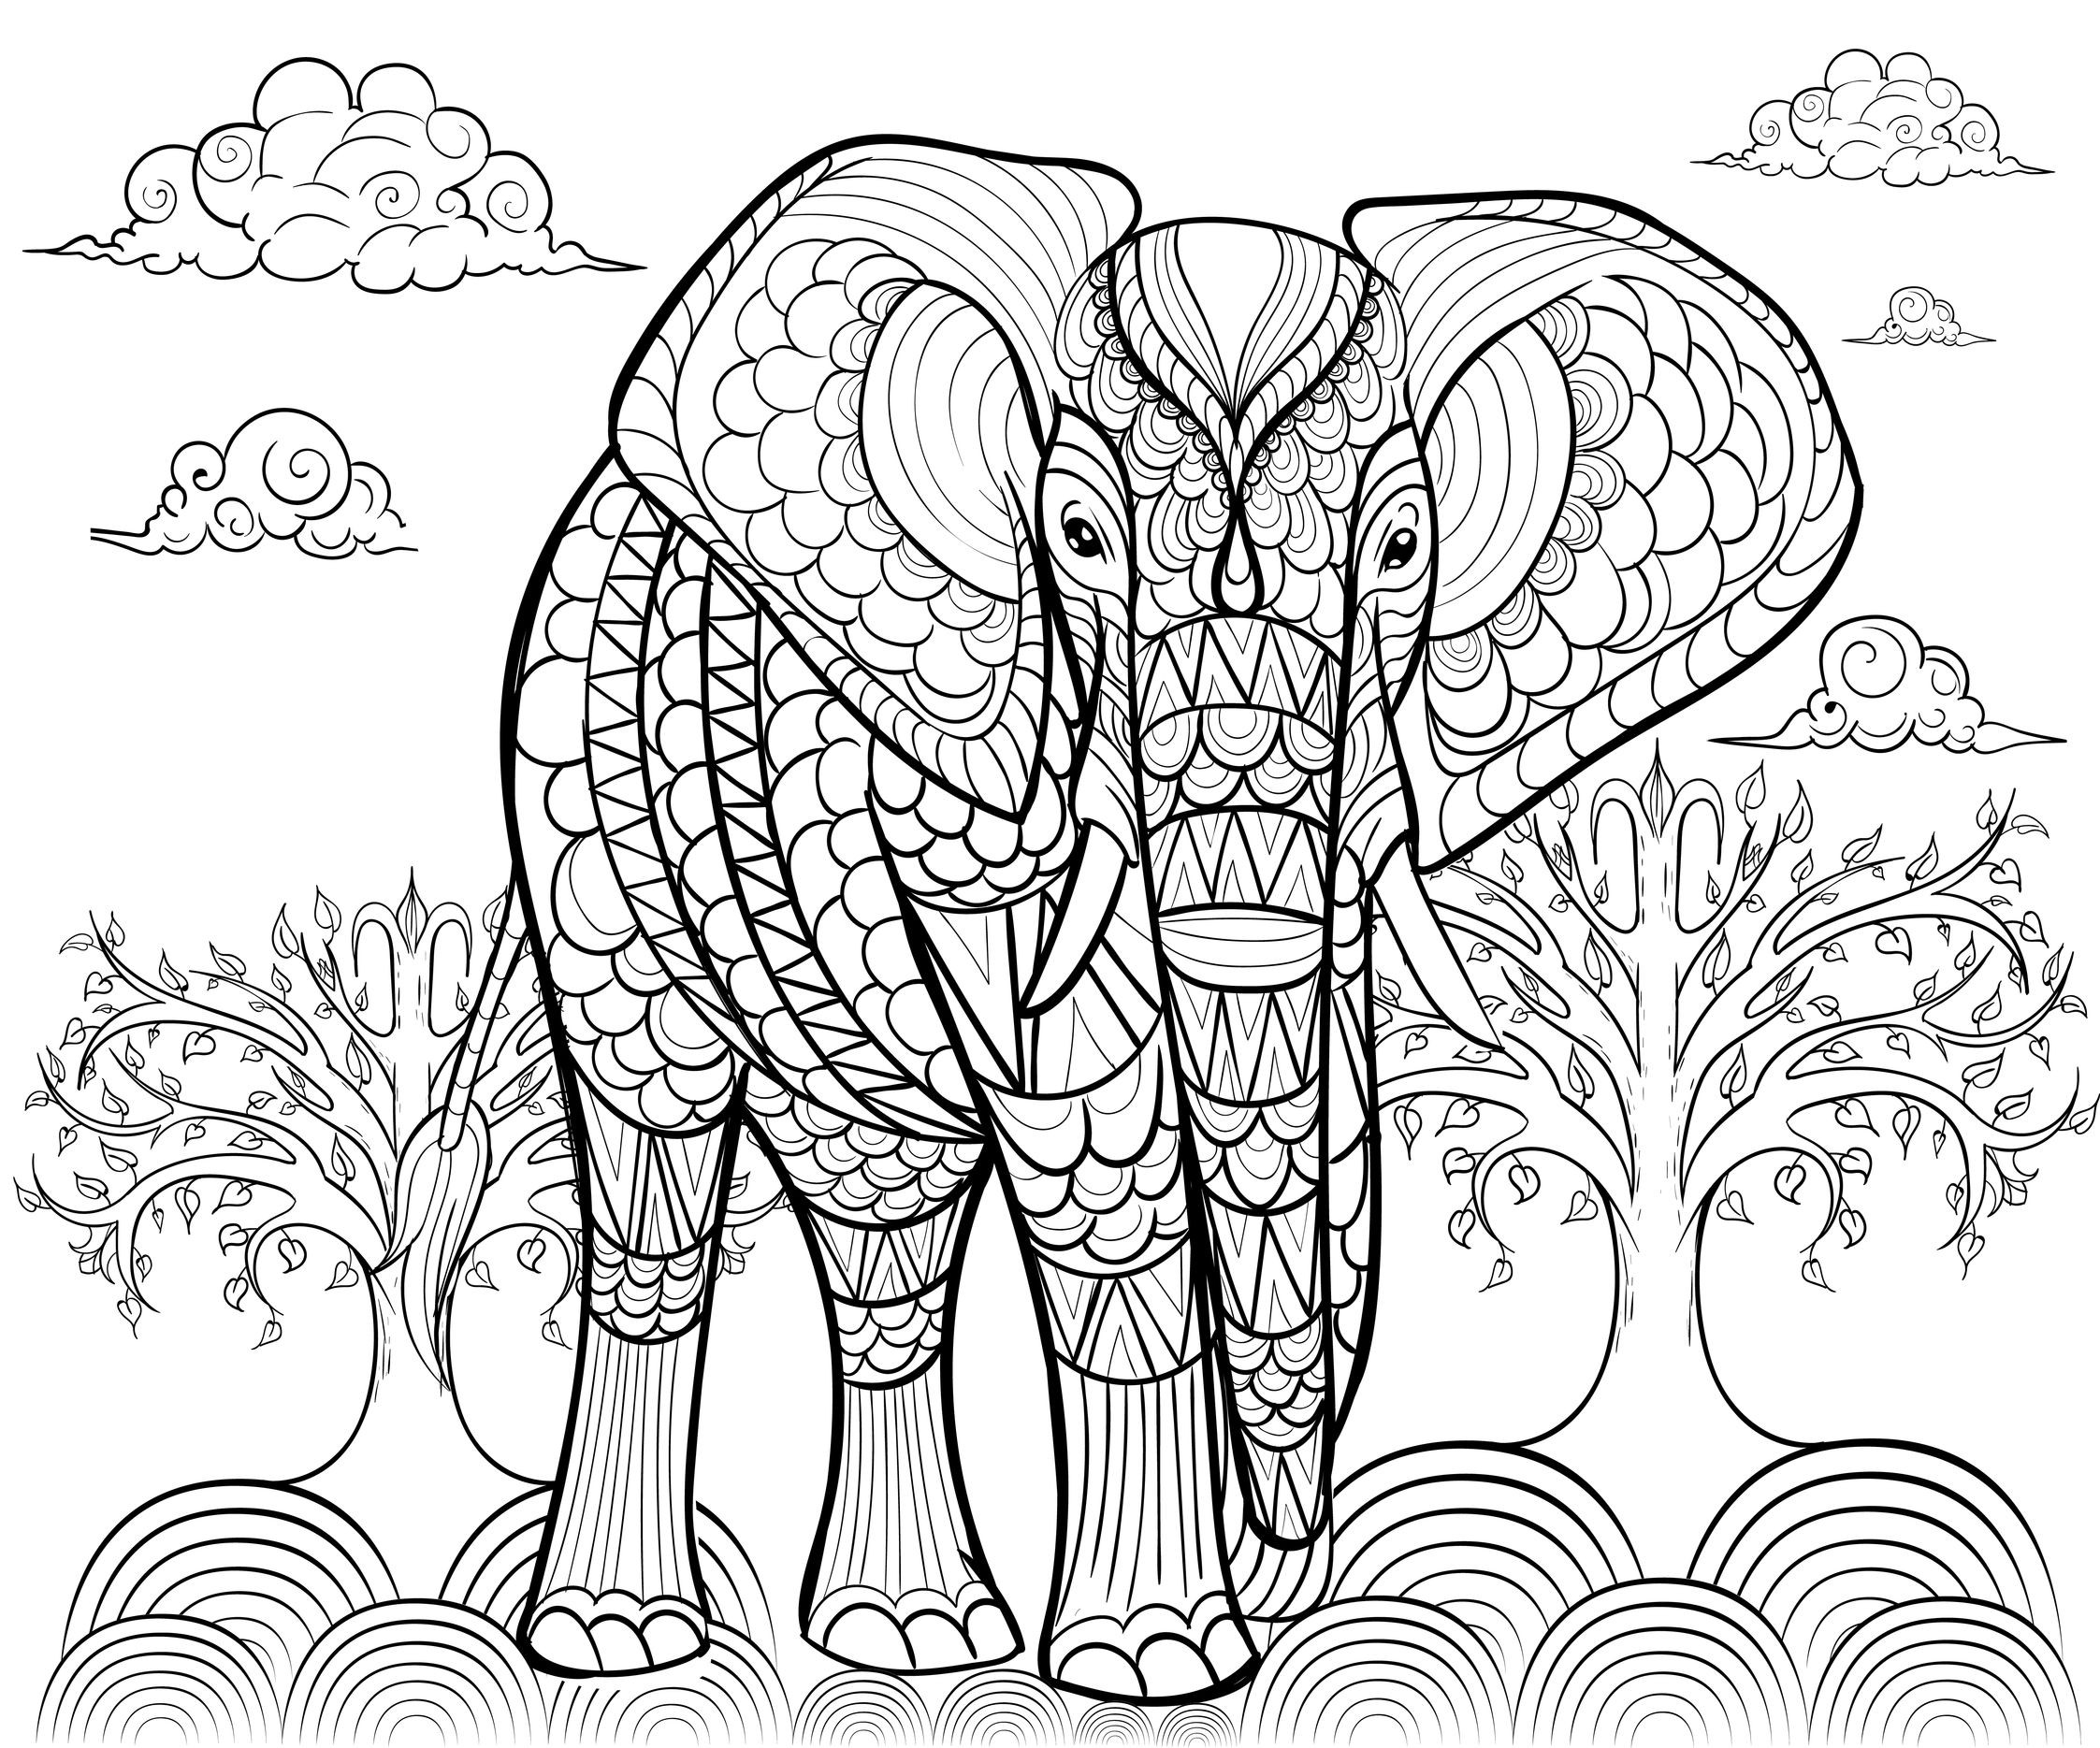 Elephant Adult Coloring Pages
 Elephant Coloring Pages for Adults Best Coloring Pages